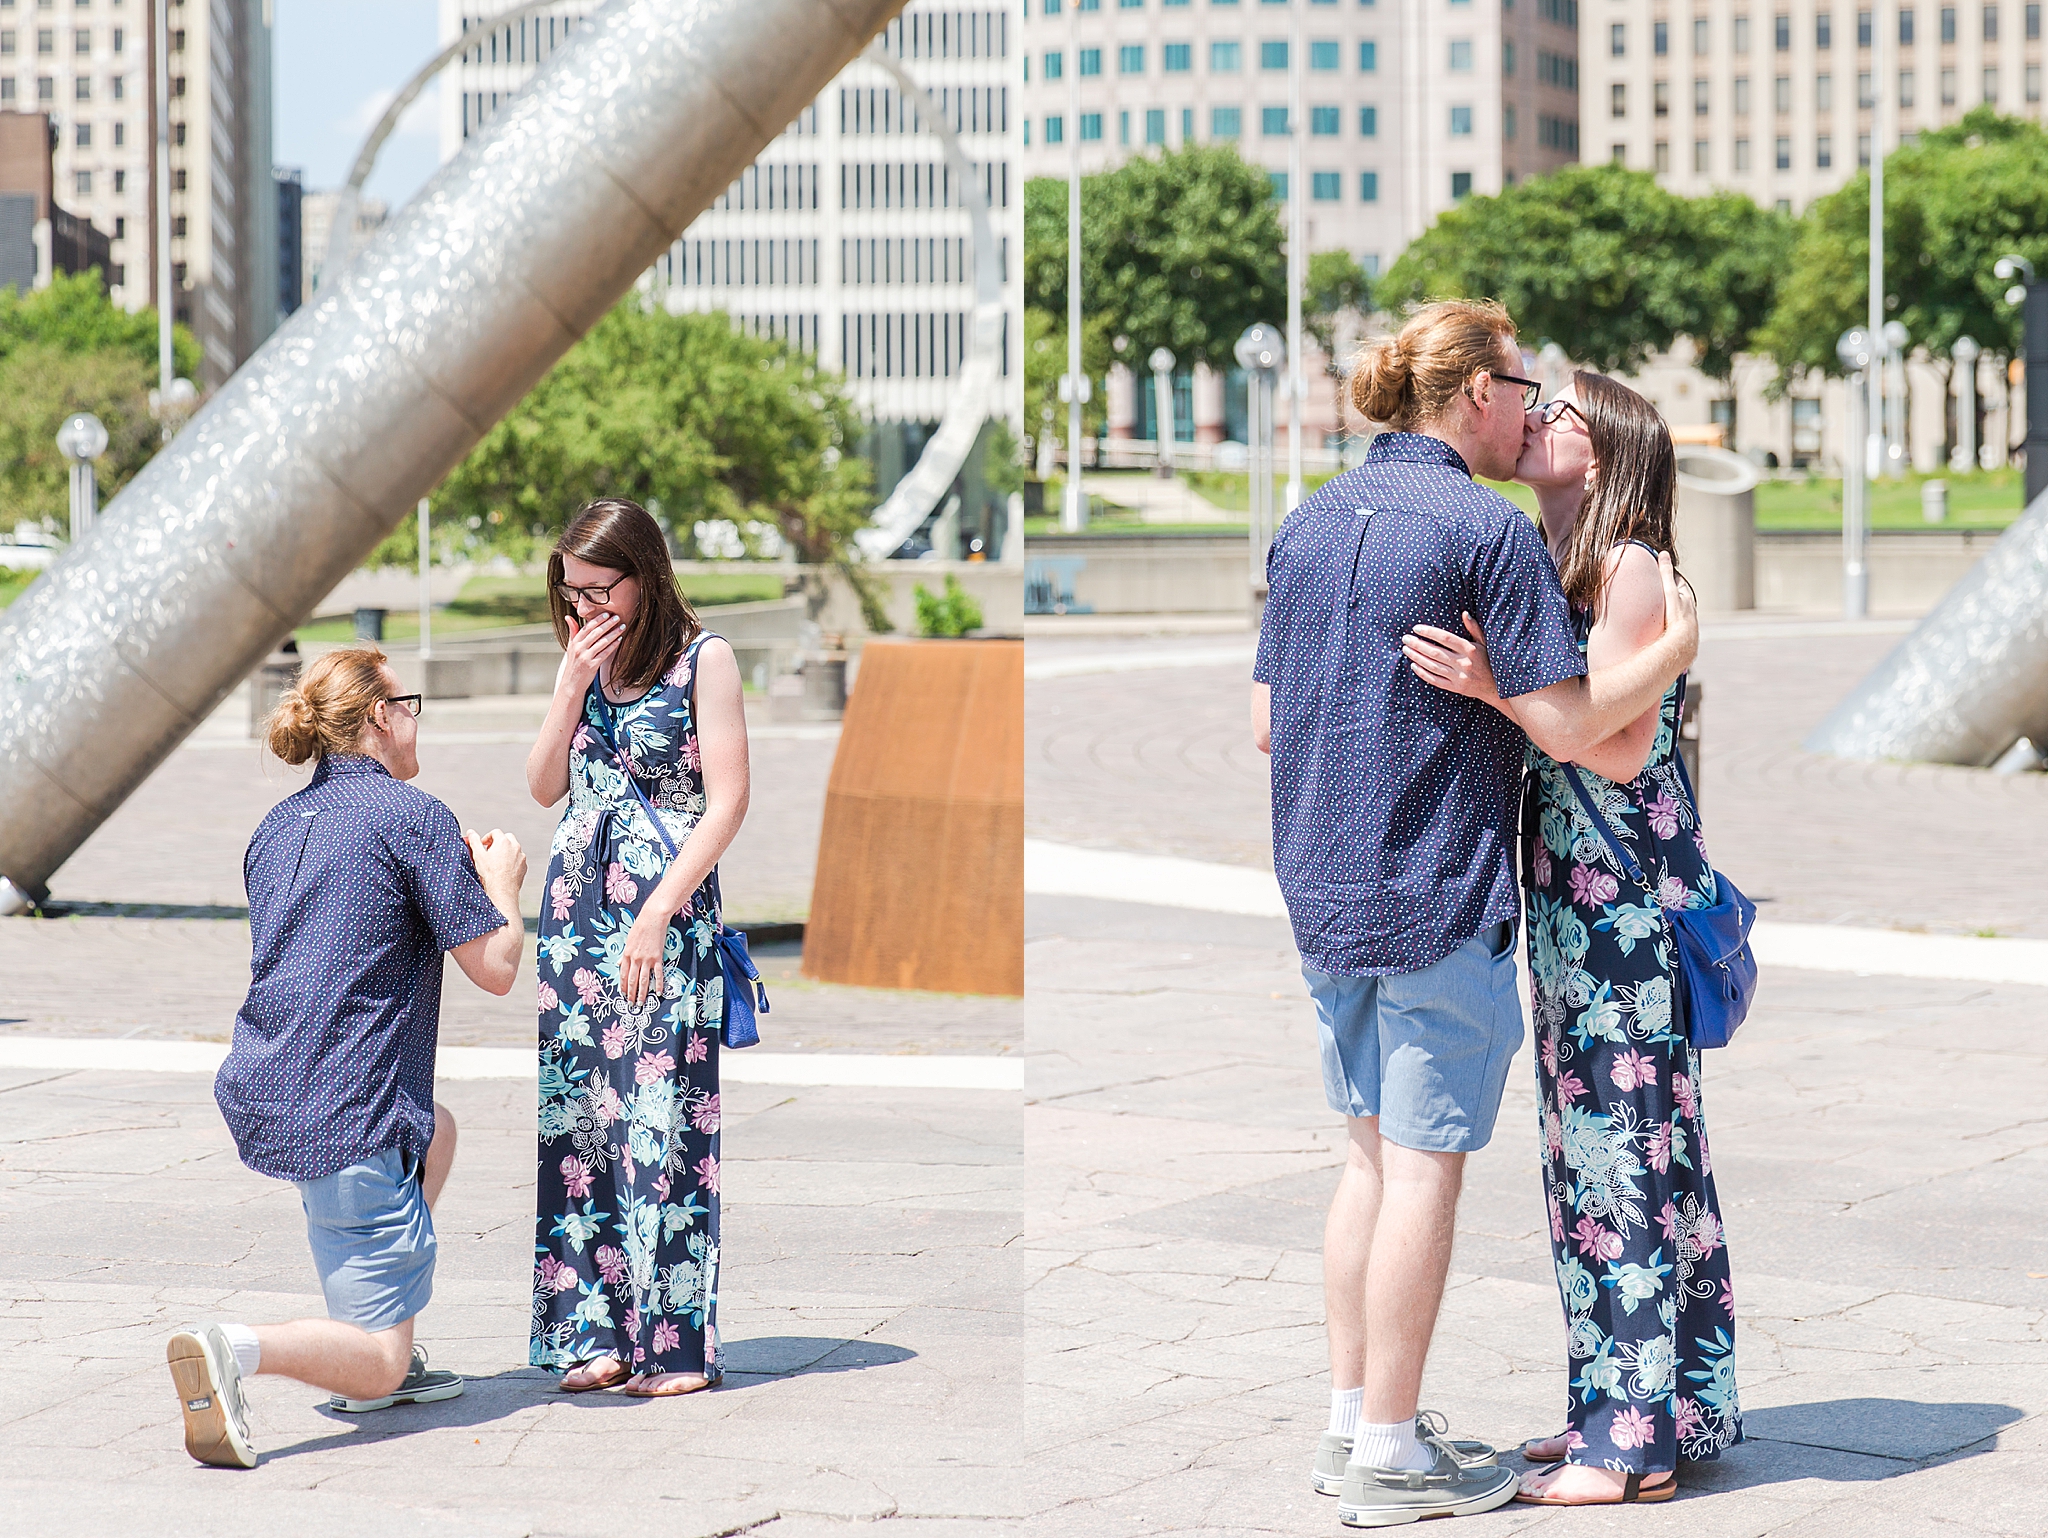 detroit-wedding-photographer-surprise-proposal-in-downtown-detroit-josh-taylor-by-courtney-carolyn-photography_0004.jpg